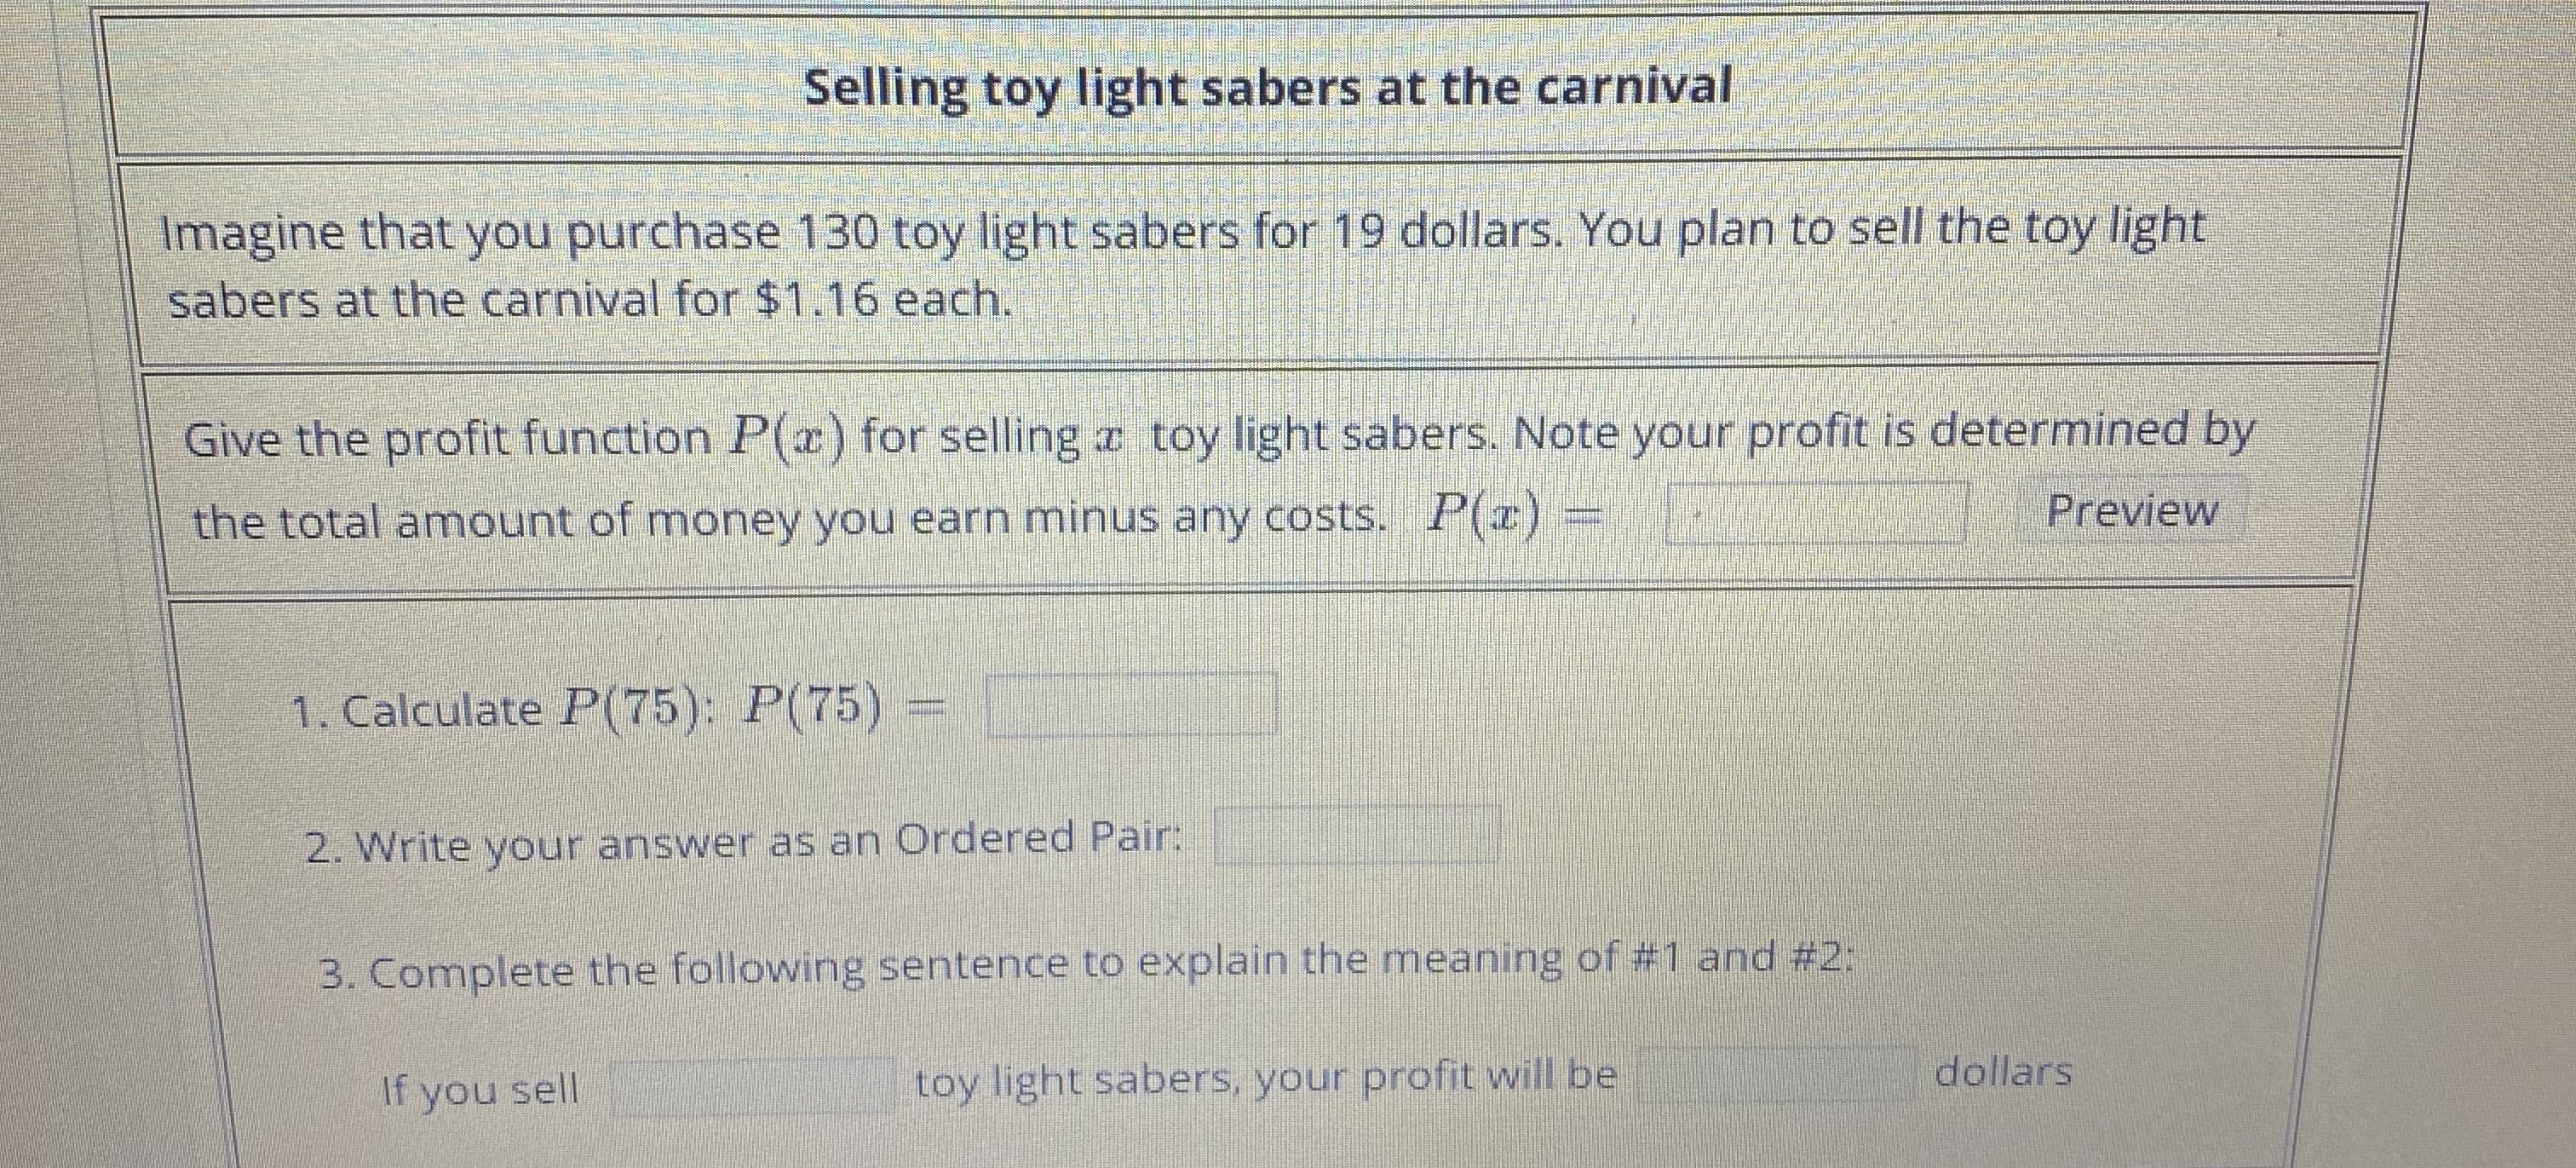 Selling toy light sabers at the carnival
Imagine that you purchase 130 toy light sabers for 19 dollars. You plan to sell the toy light
sabers at the carnival for $1.16 each.
Give the profit function P(x) for selling x toy light sabers. Note your profit is determined by
Preview
the total amount of money you earn minus any costs. P(x) =
1. Calculate P(75): P(75)
2. Write your answer as an Ordered Pair:
3. Complete the following sentence to explain the meaning of #1 and #2:
dollars
toy light sabers, your profit will be
If you sell
